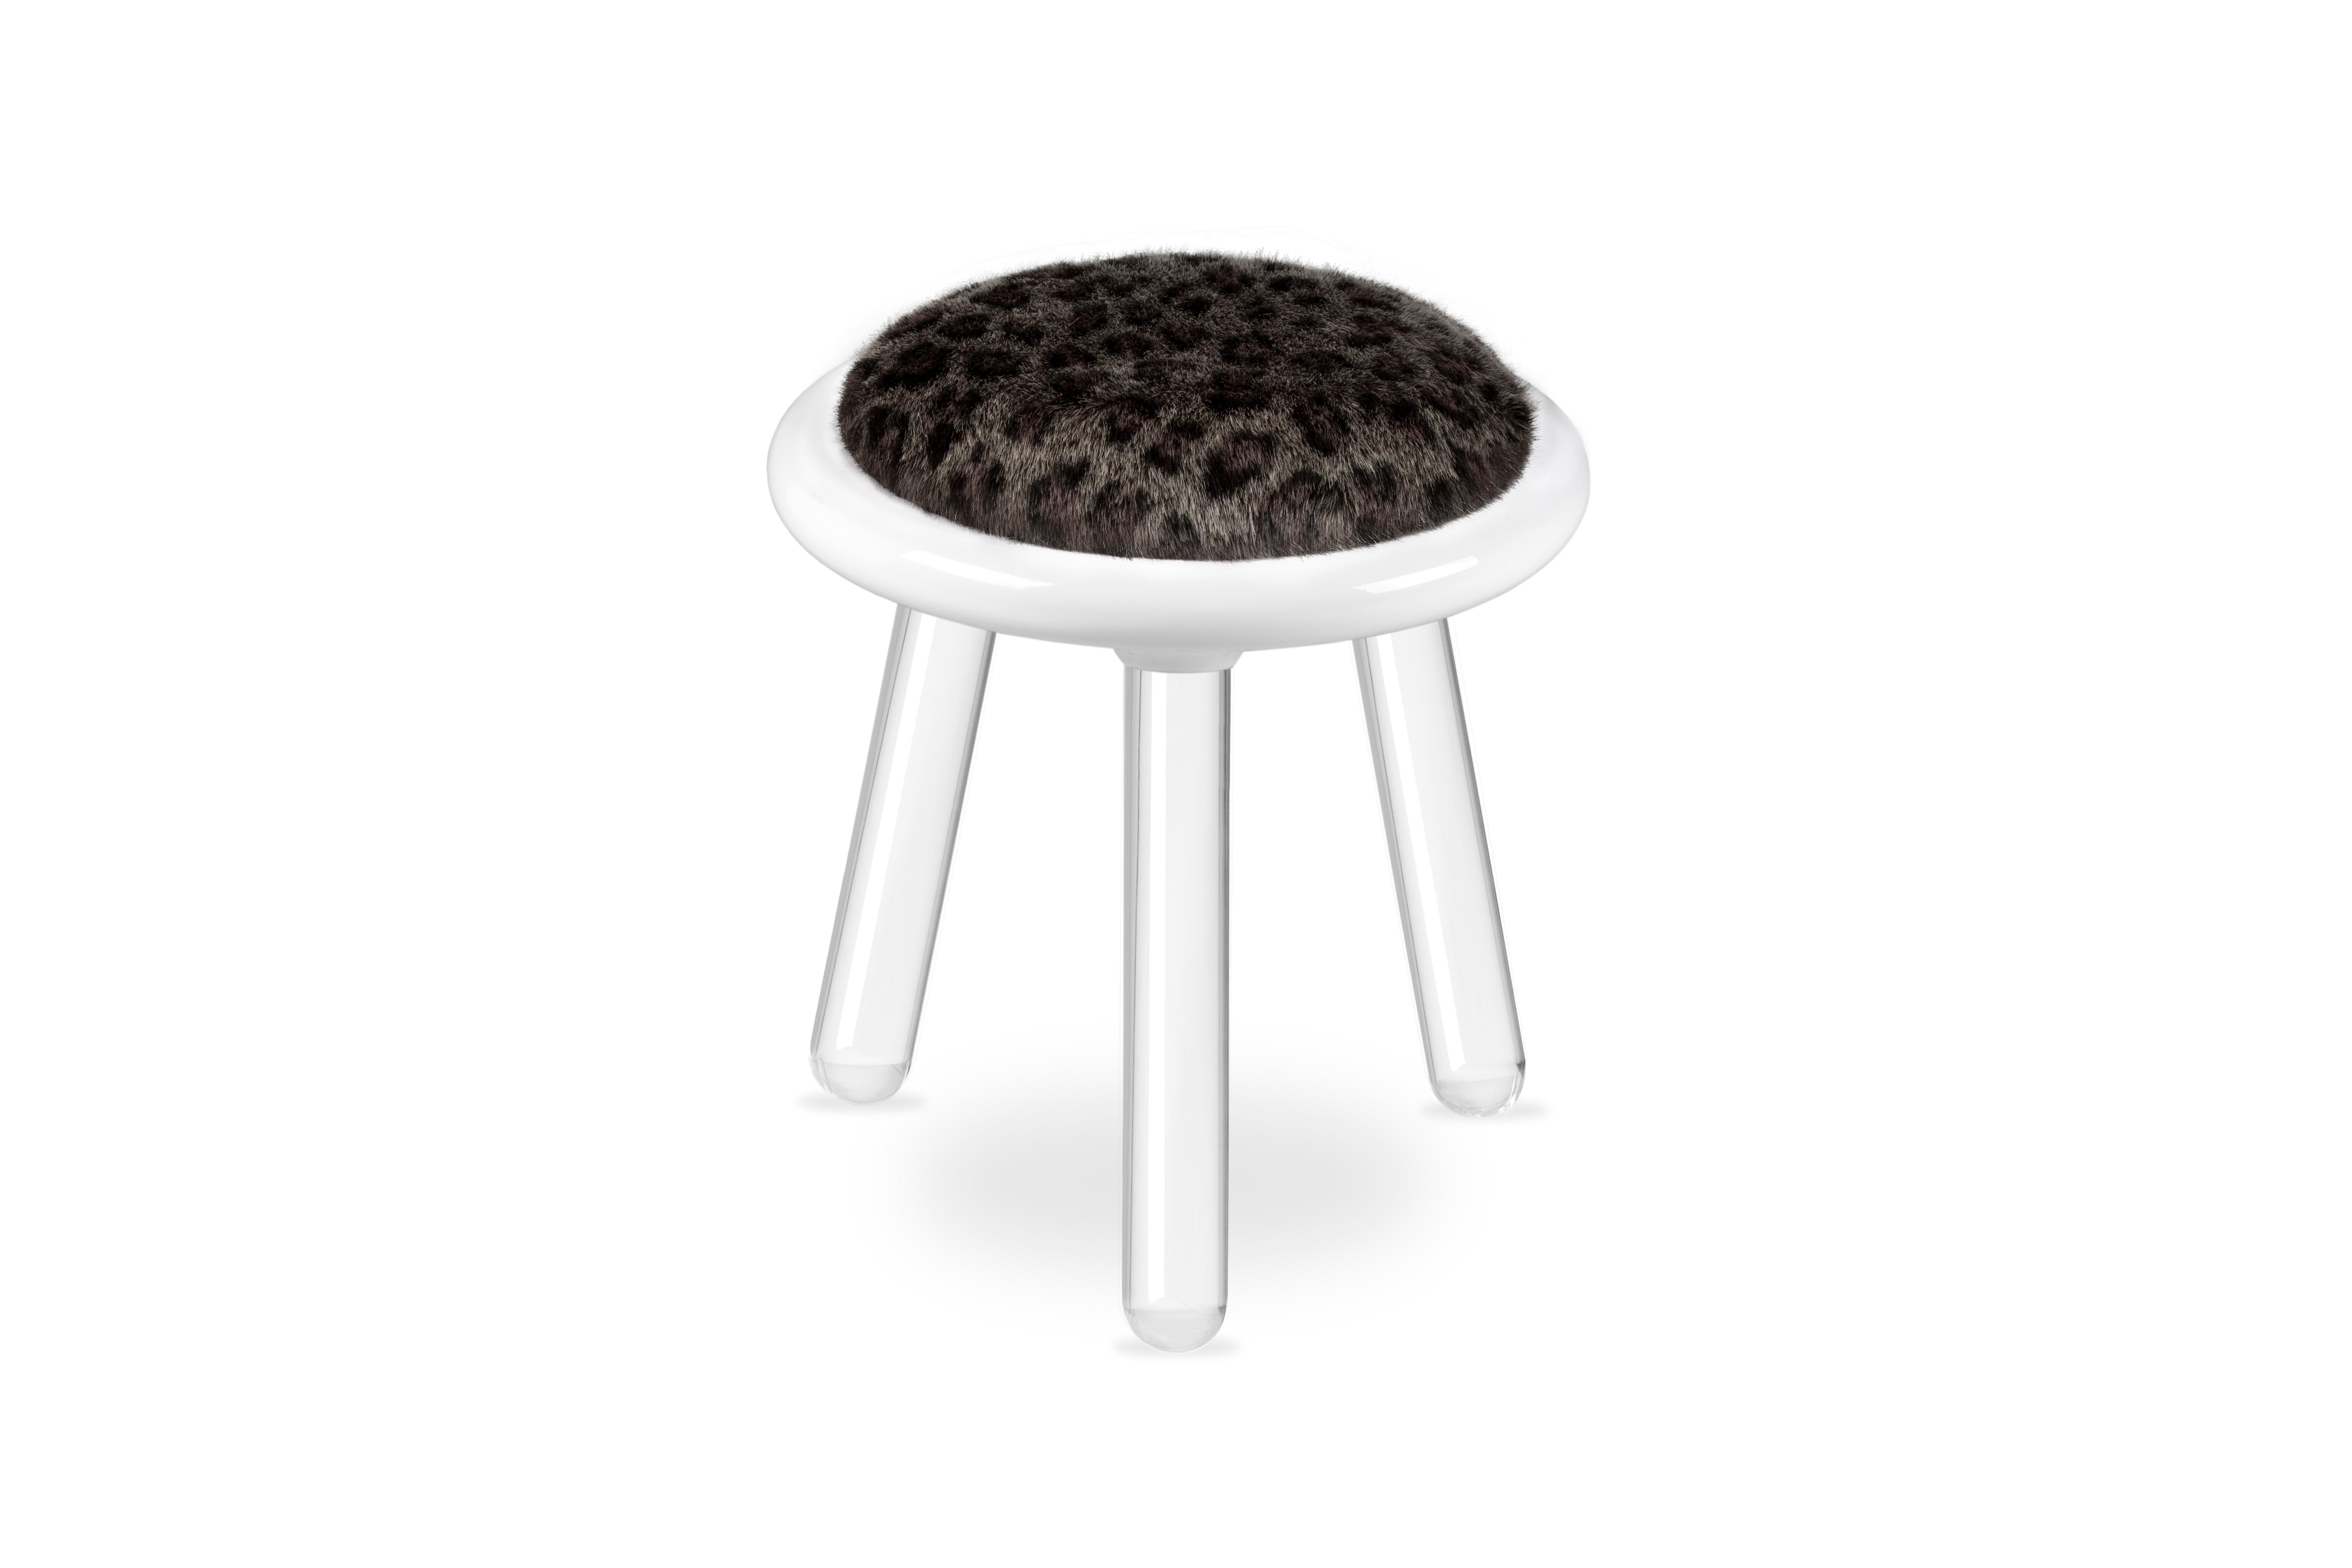 Illusion Leopard Kids Stool in Clear Acrylic Legs by Circu Magical Furniture

The Illusion Series brings a touch of magic to the children's playroom decor. This kids’ furniture set includes a table, a stool and a chair, the perfect addition to every